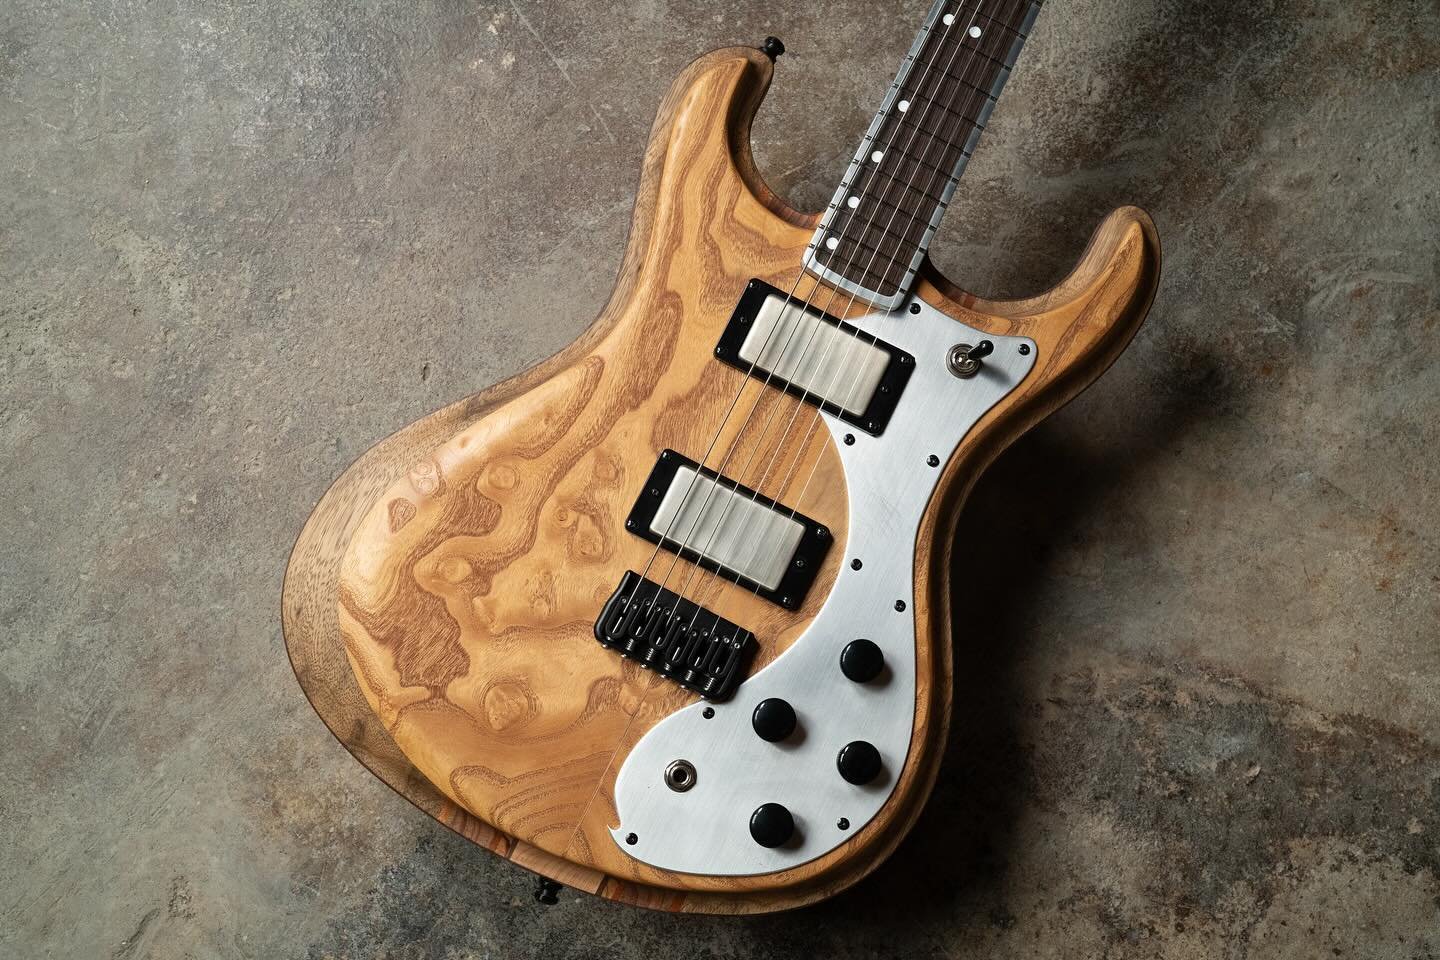 This is the lightest guitar I&rsquo;ve built with an aluminum neck.

Weight is usually the first reservation with an aluminum build. @baguley_guitars offers a chambered neck and this one happens to have a wenge fretboard inlaid into it. The body also